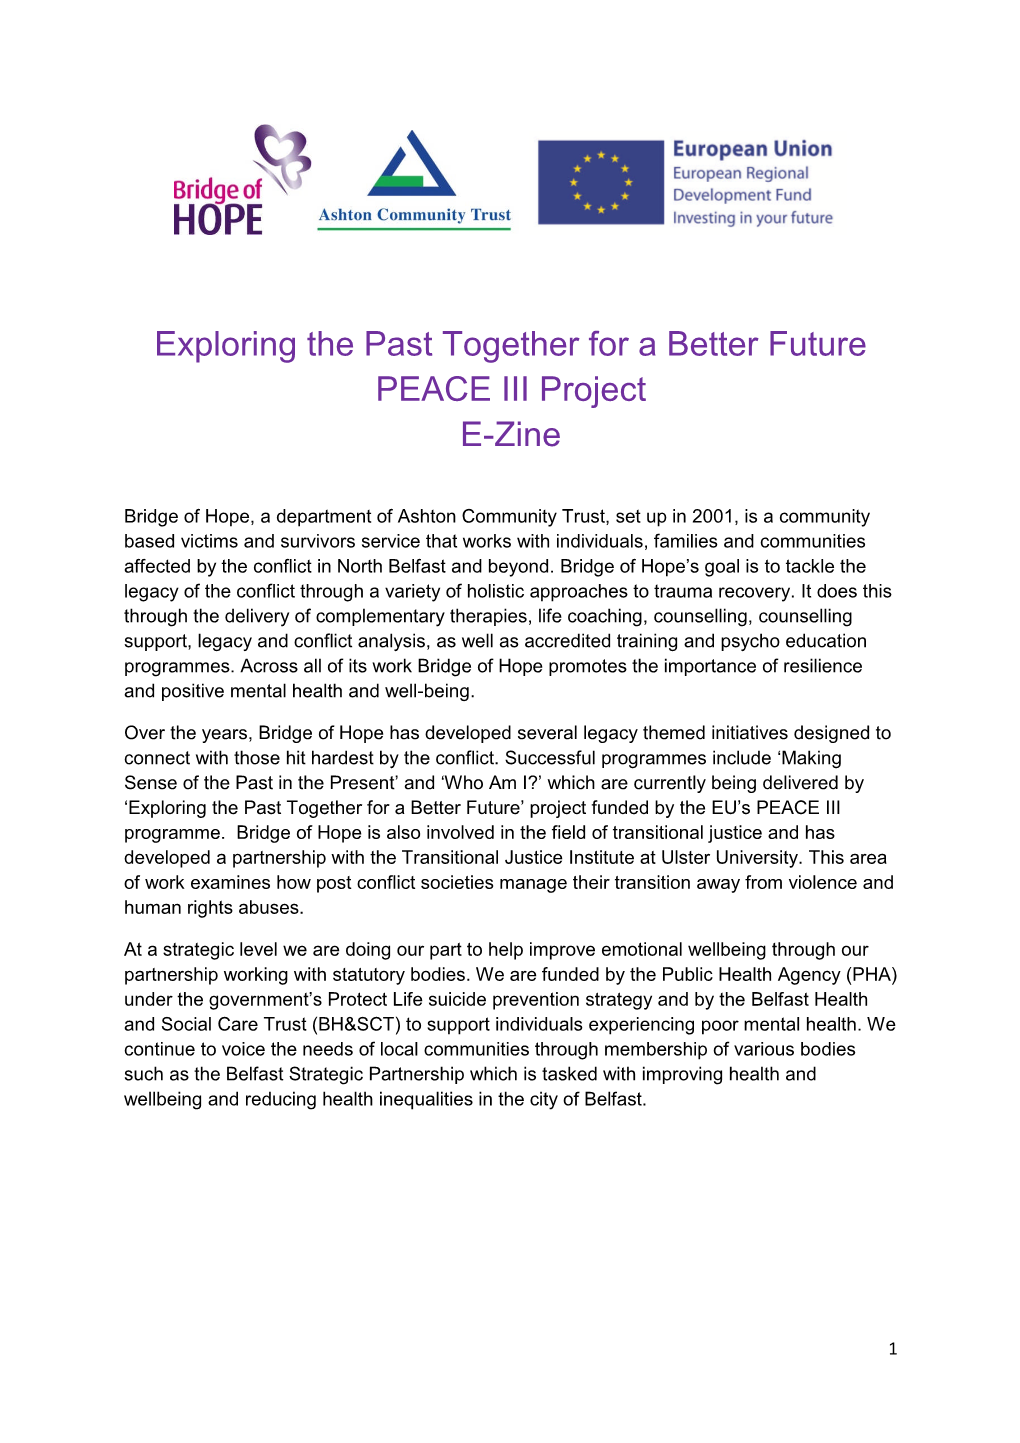 Exploring the Past Together for a Better Future PEACE III Project E-Zine